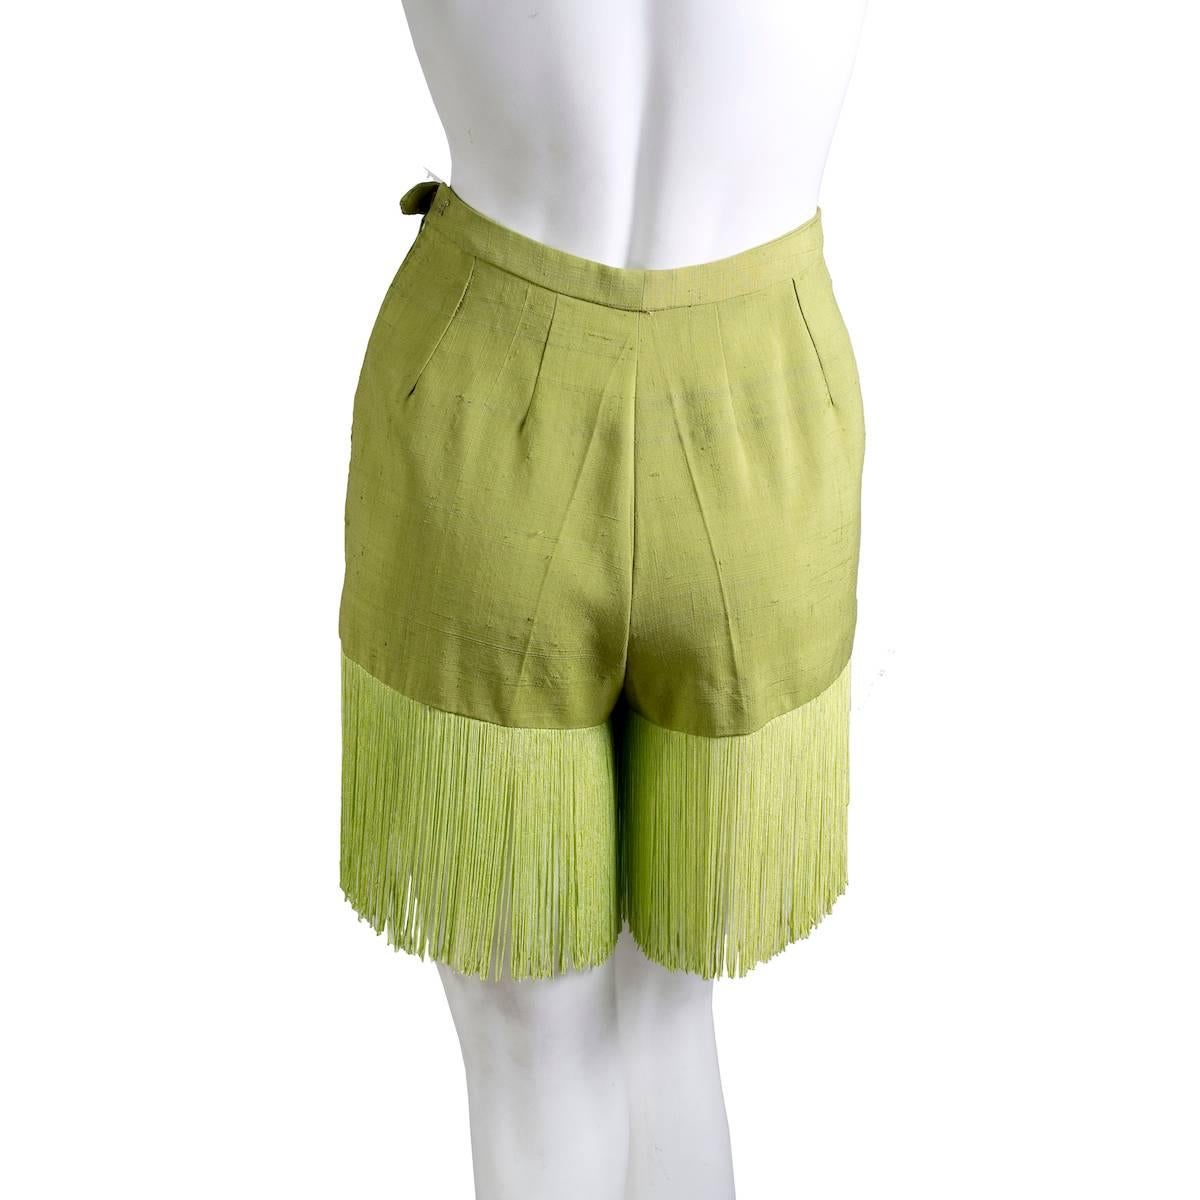 Pair of heavy linen shorts from Pucci.  It features a side zipper closure and fringe along the hem.  High waisted fit with an 11